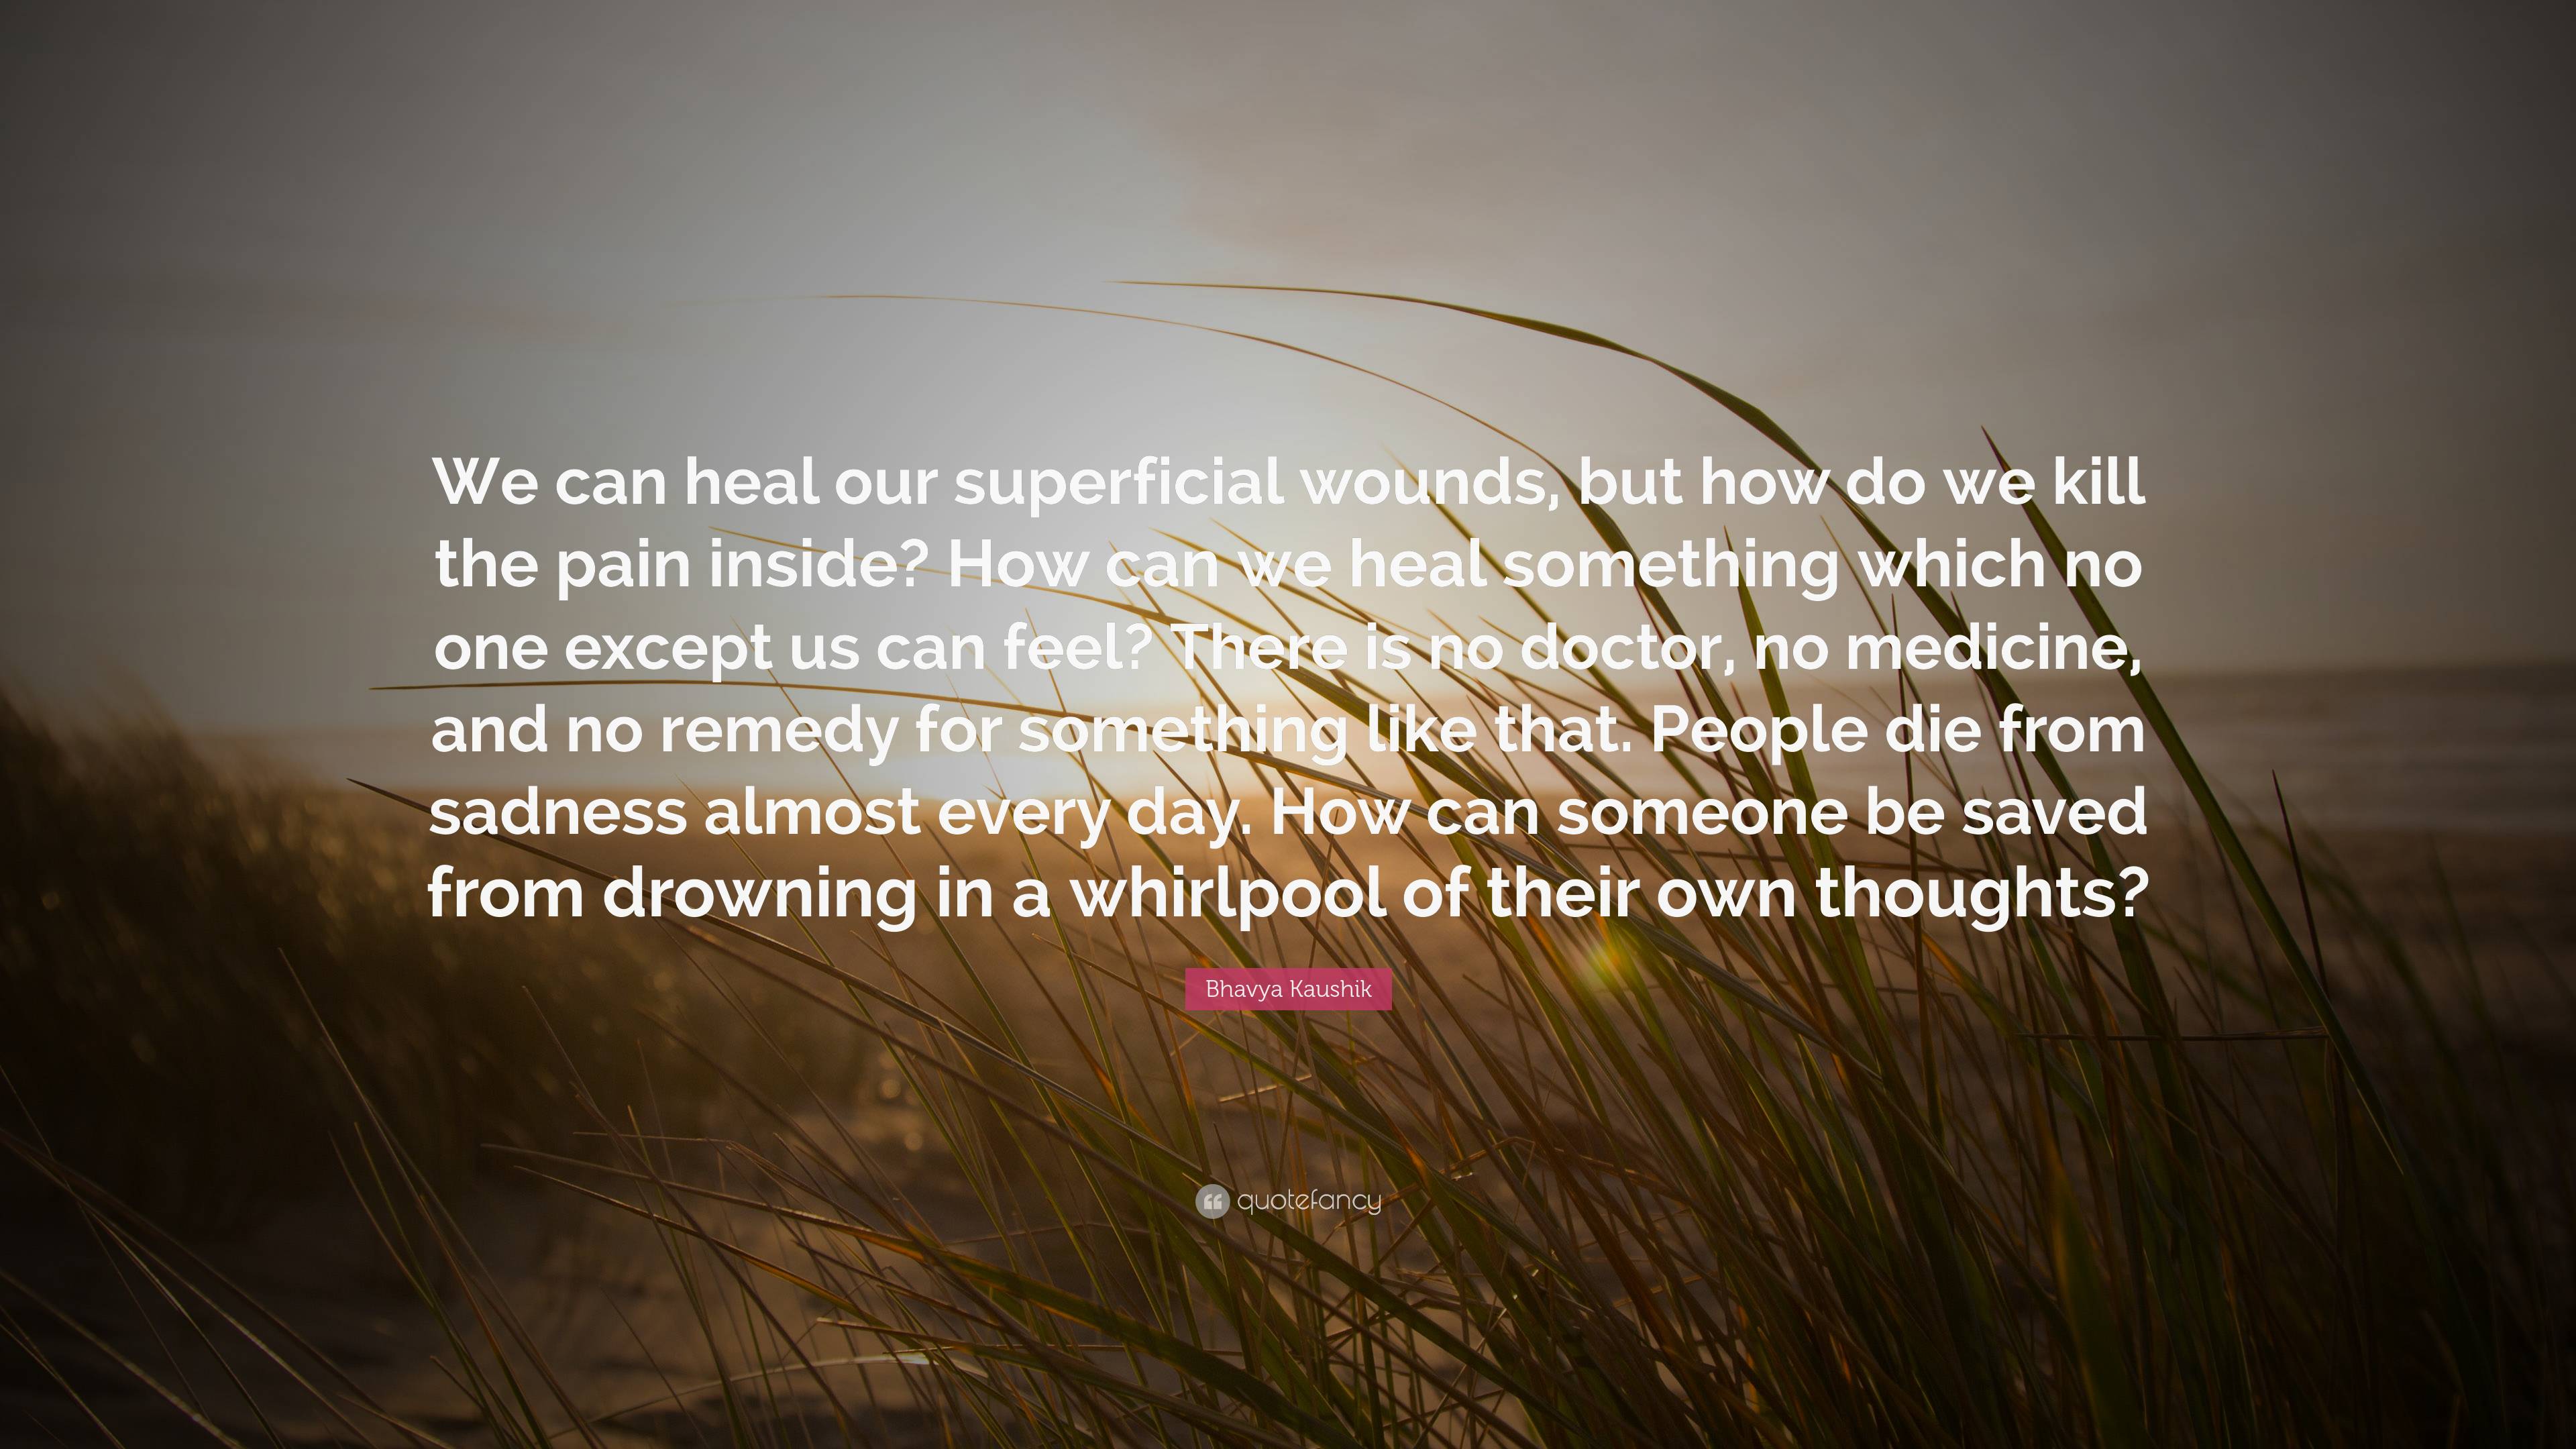 7642542 Bhavya Kaushik Quote We can heal our superficial wounds but how do